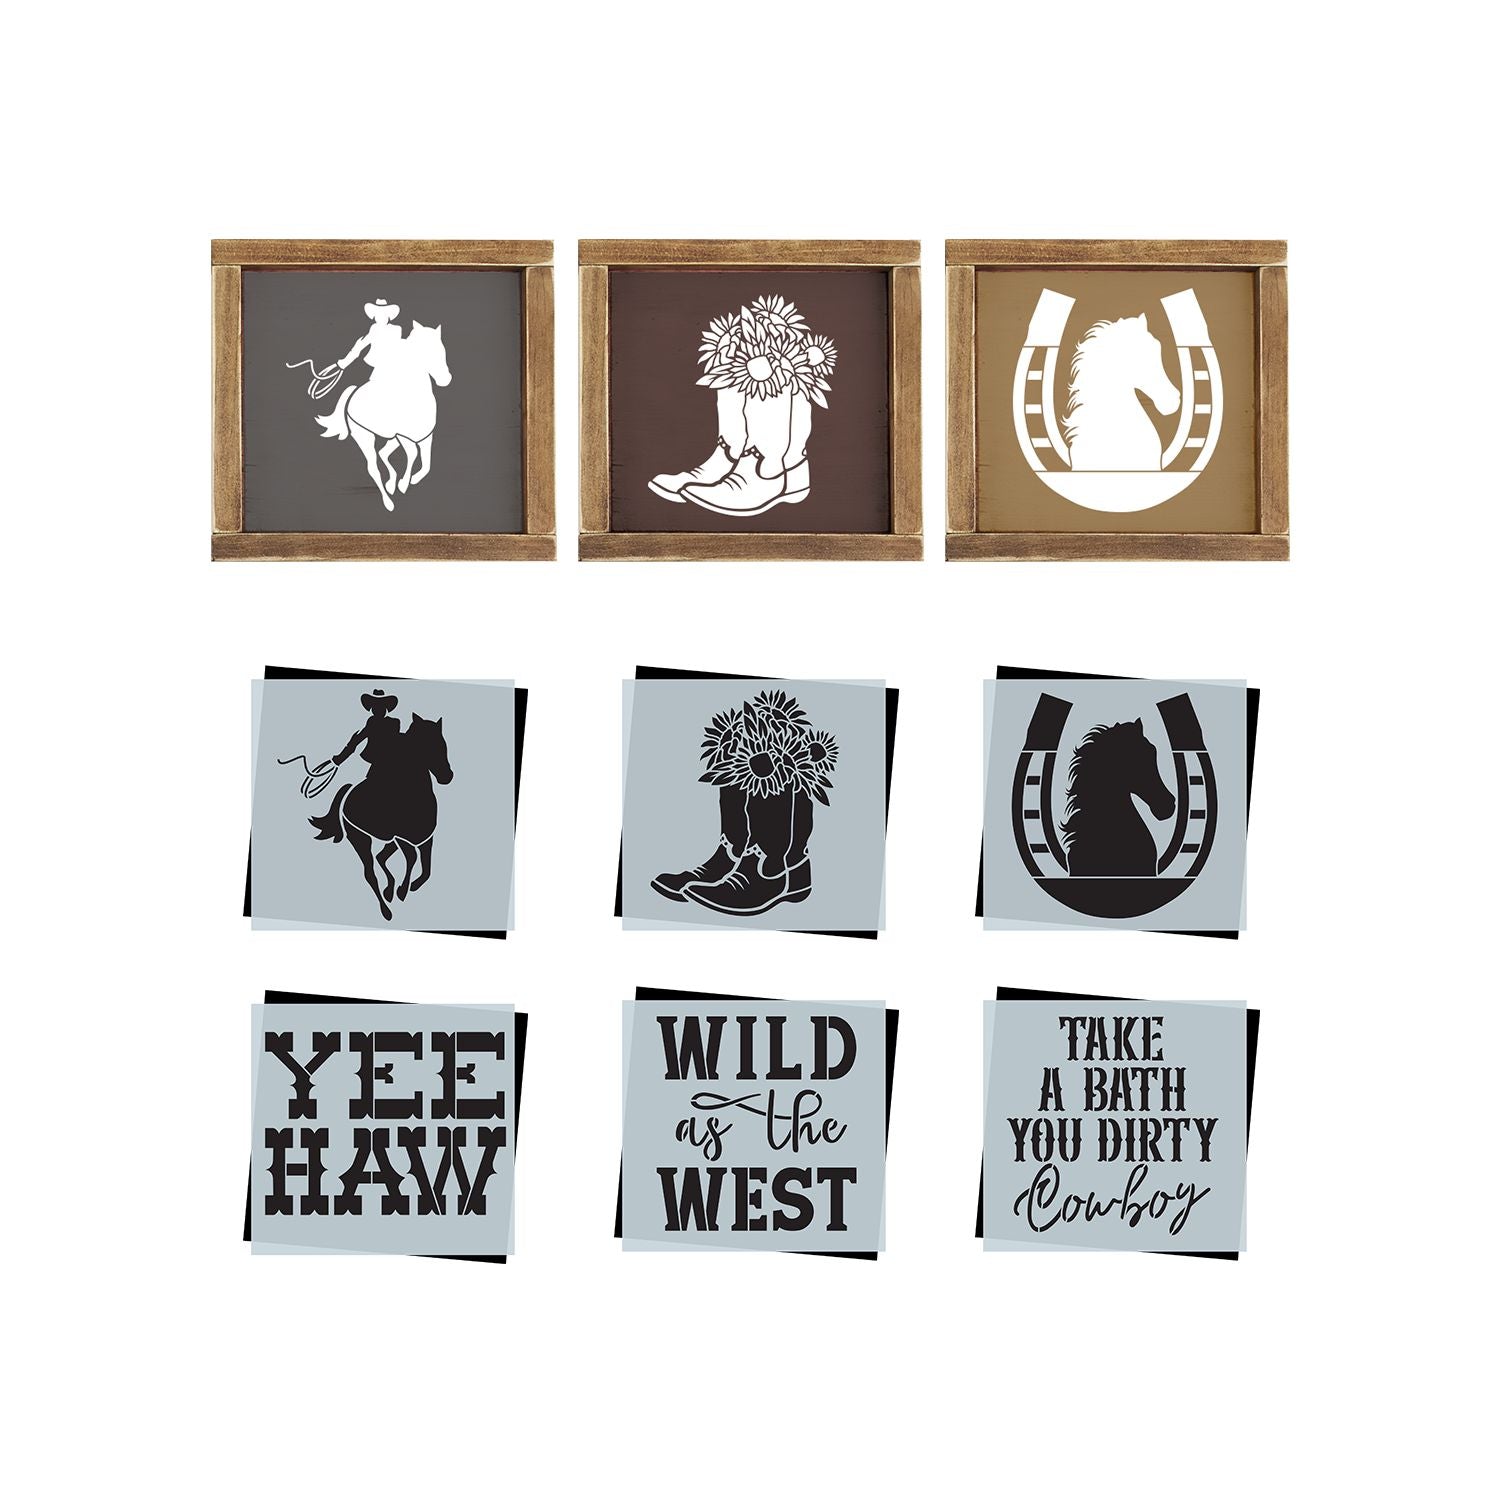 DIY reusable farmhouse cowboy sign stencils, cowboy stencil cut out, cowboy boots with sunflowers stencil cut out, horse shoe stencil cut out, horse on horse shoe stencil sign,  country sign stencils, wild as the west wood sign stencil, take a bath you dirty cowboy wood sign stencil, western wood signs, southwestern wood signs, cowboy signs, cowgirl wood signs, horse wood sign, country farm wood signs